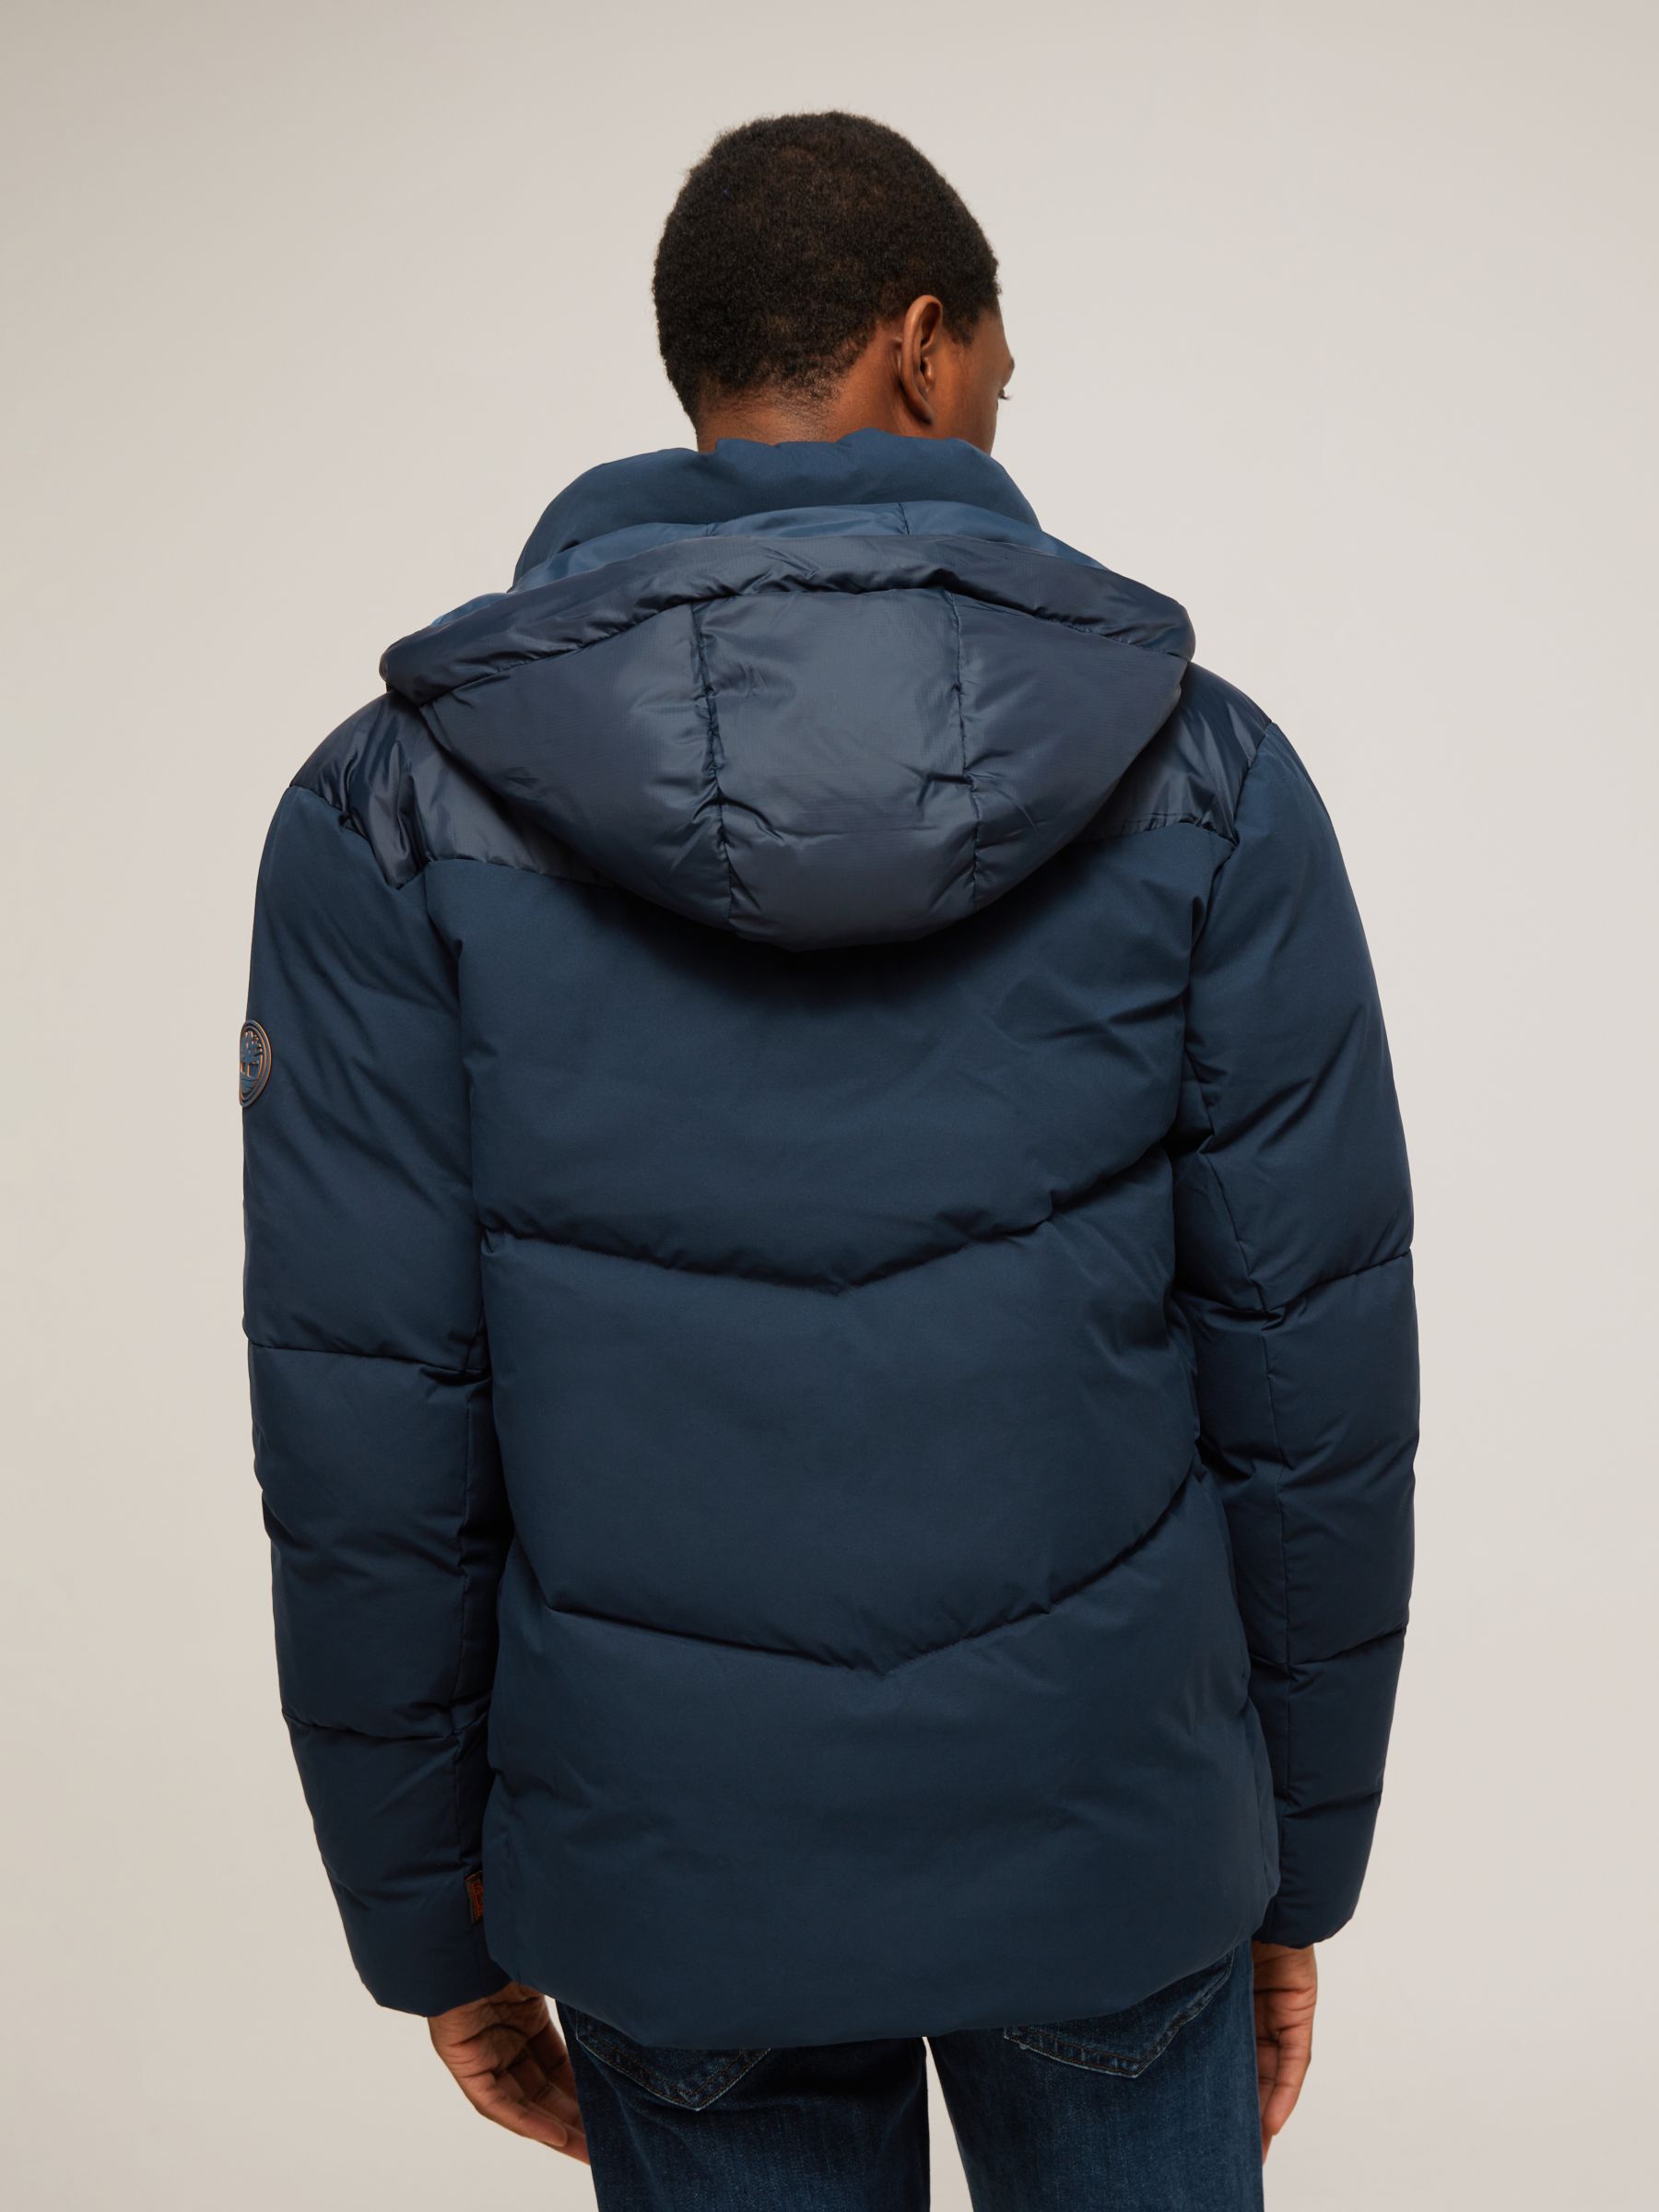 Timberland Quilted Jacket, Dark Sapphire at John Lewis & Partners